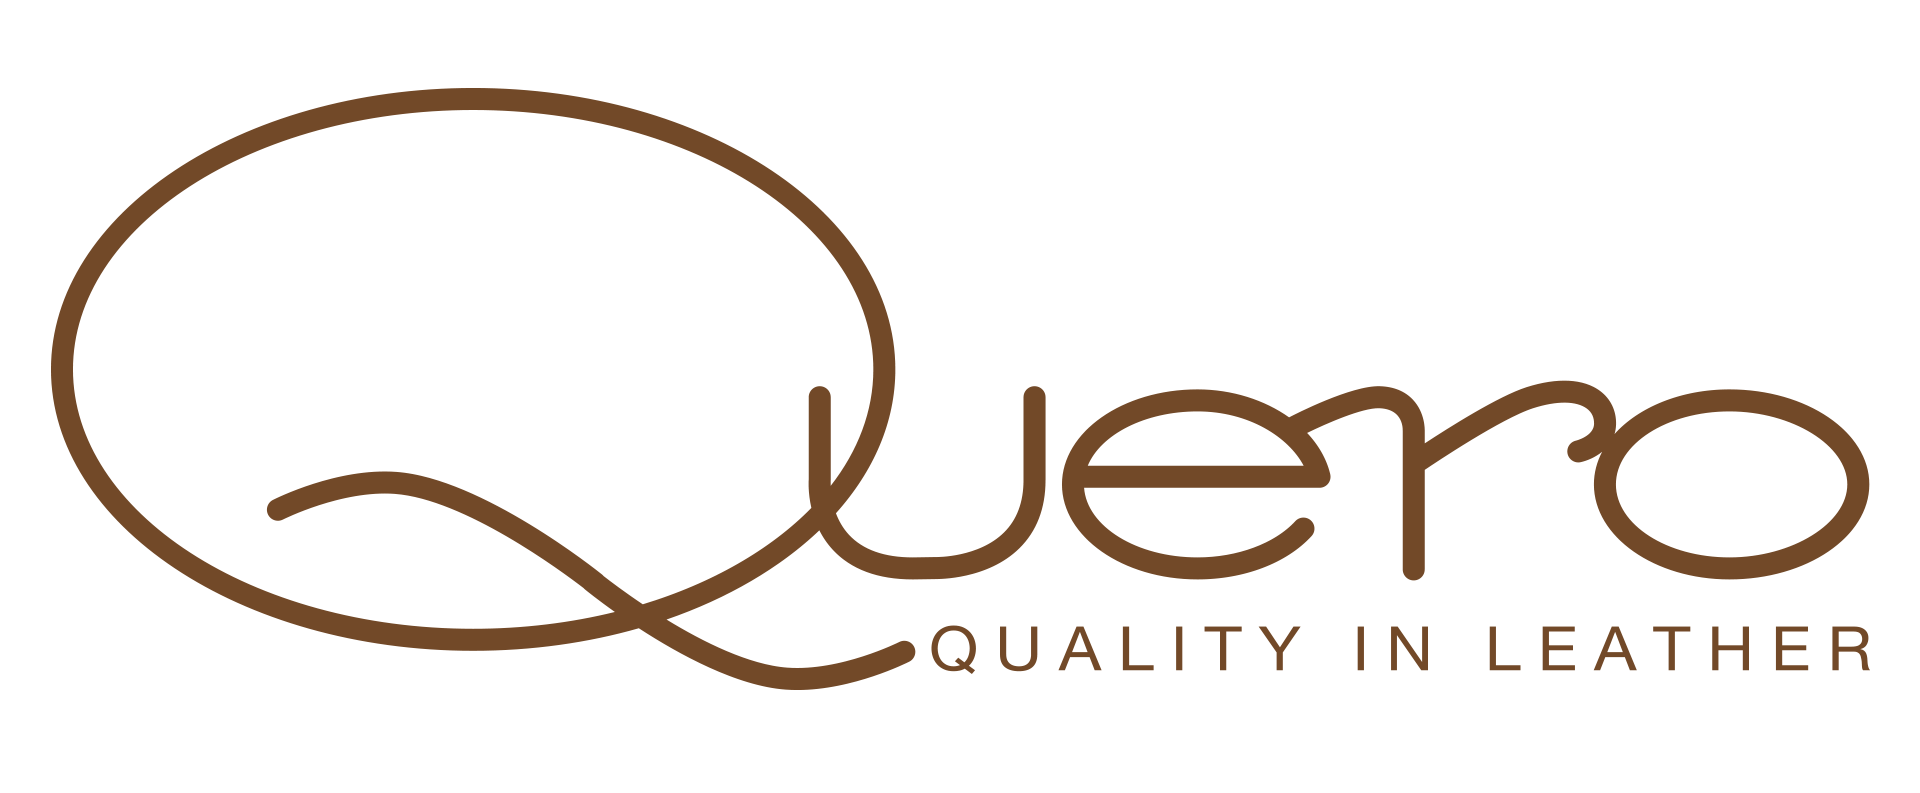 Quero-Quality in leather